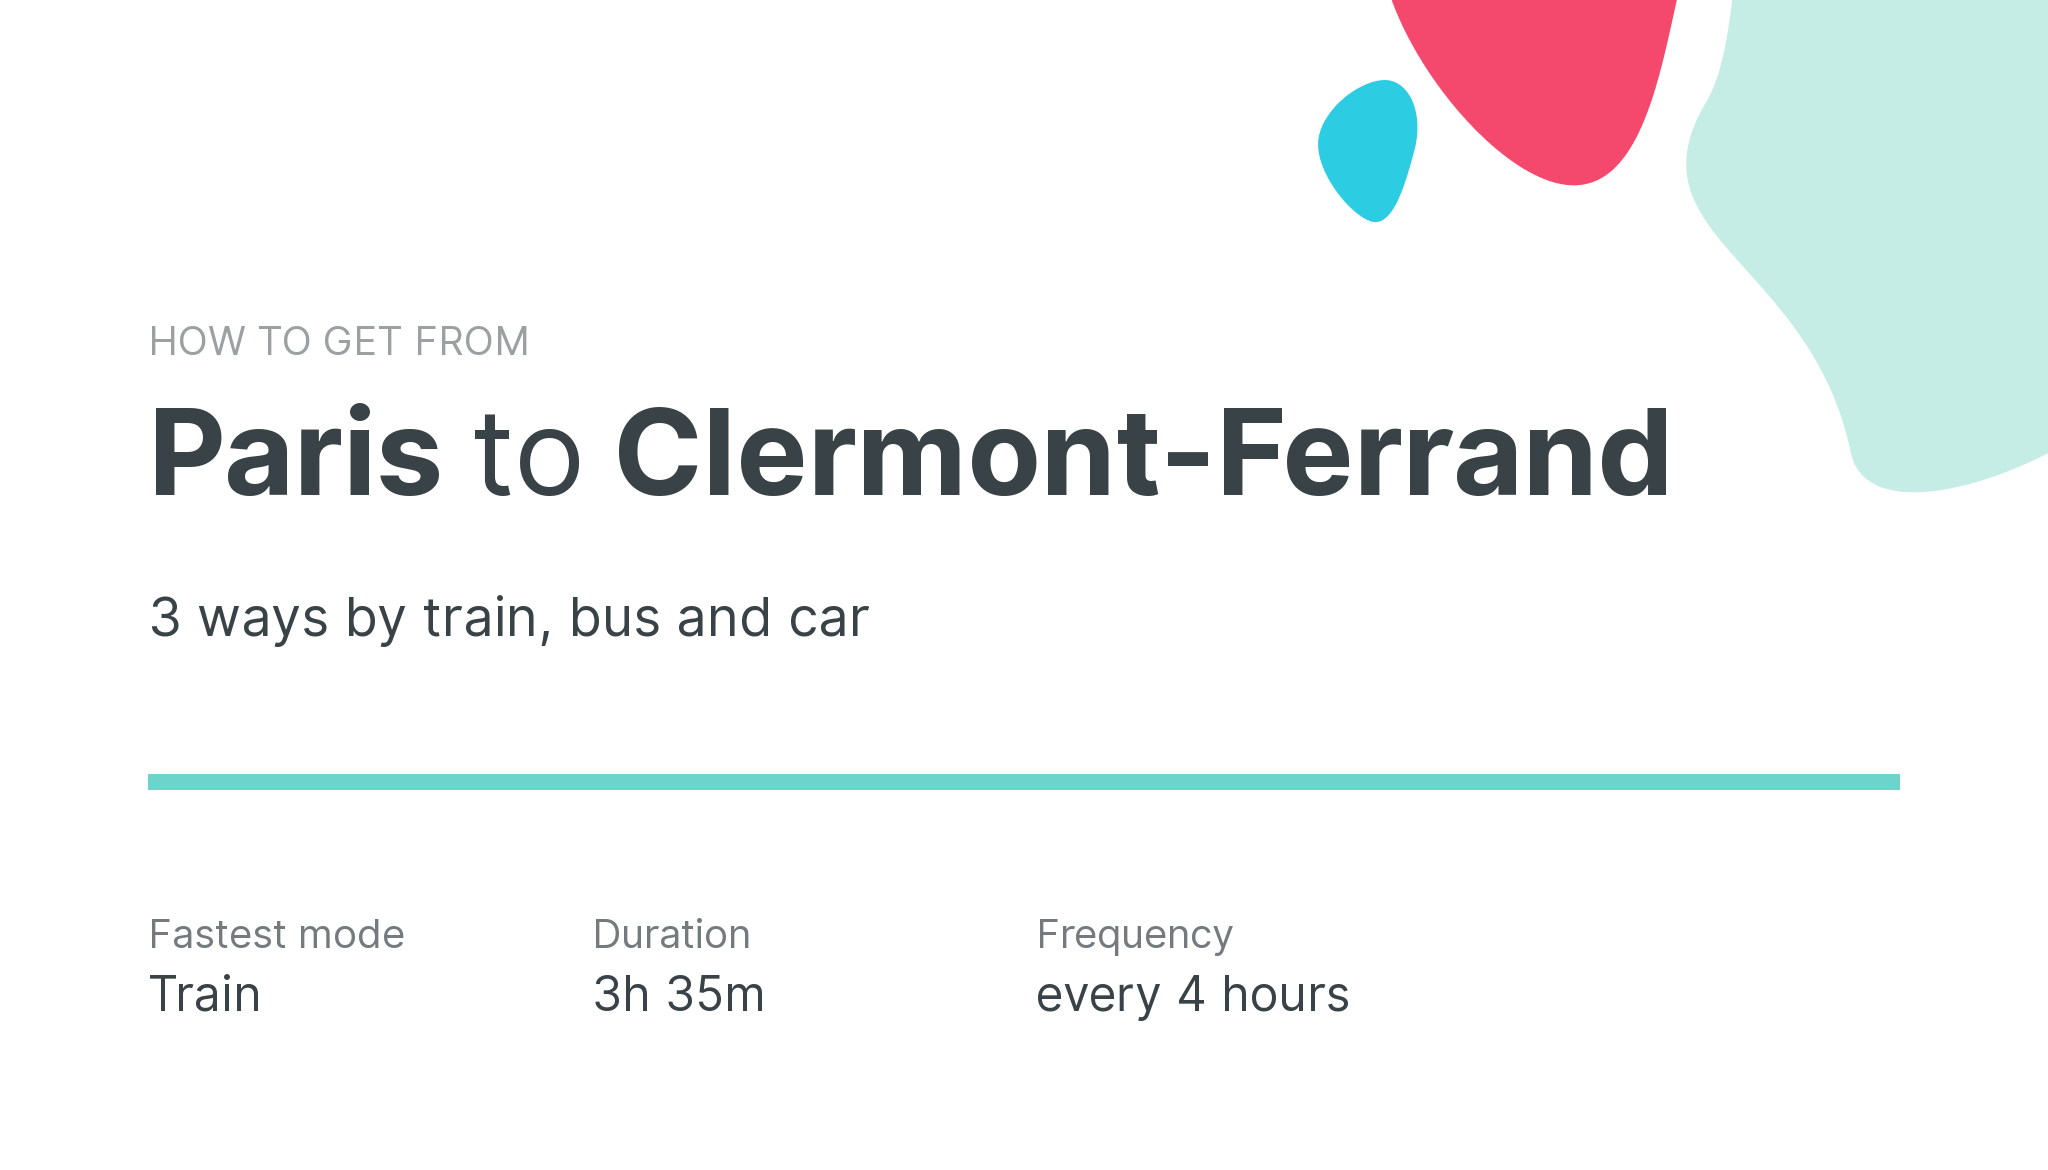 How do I get from Paris to Clermont-Ferrand